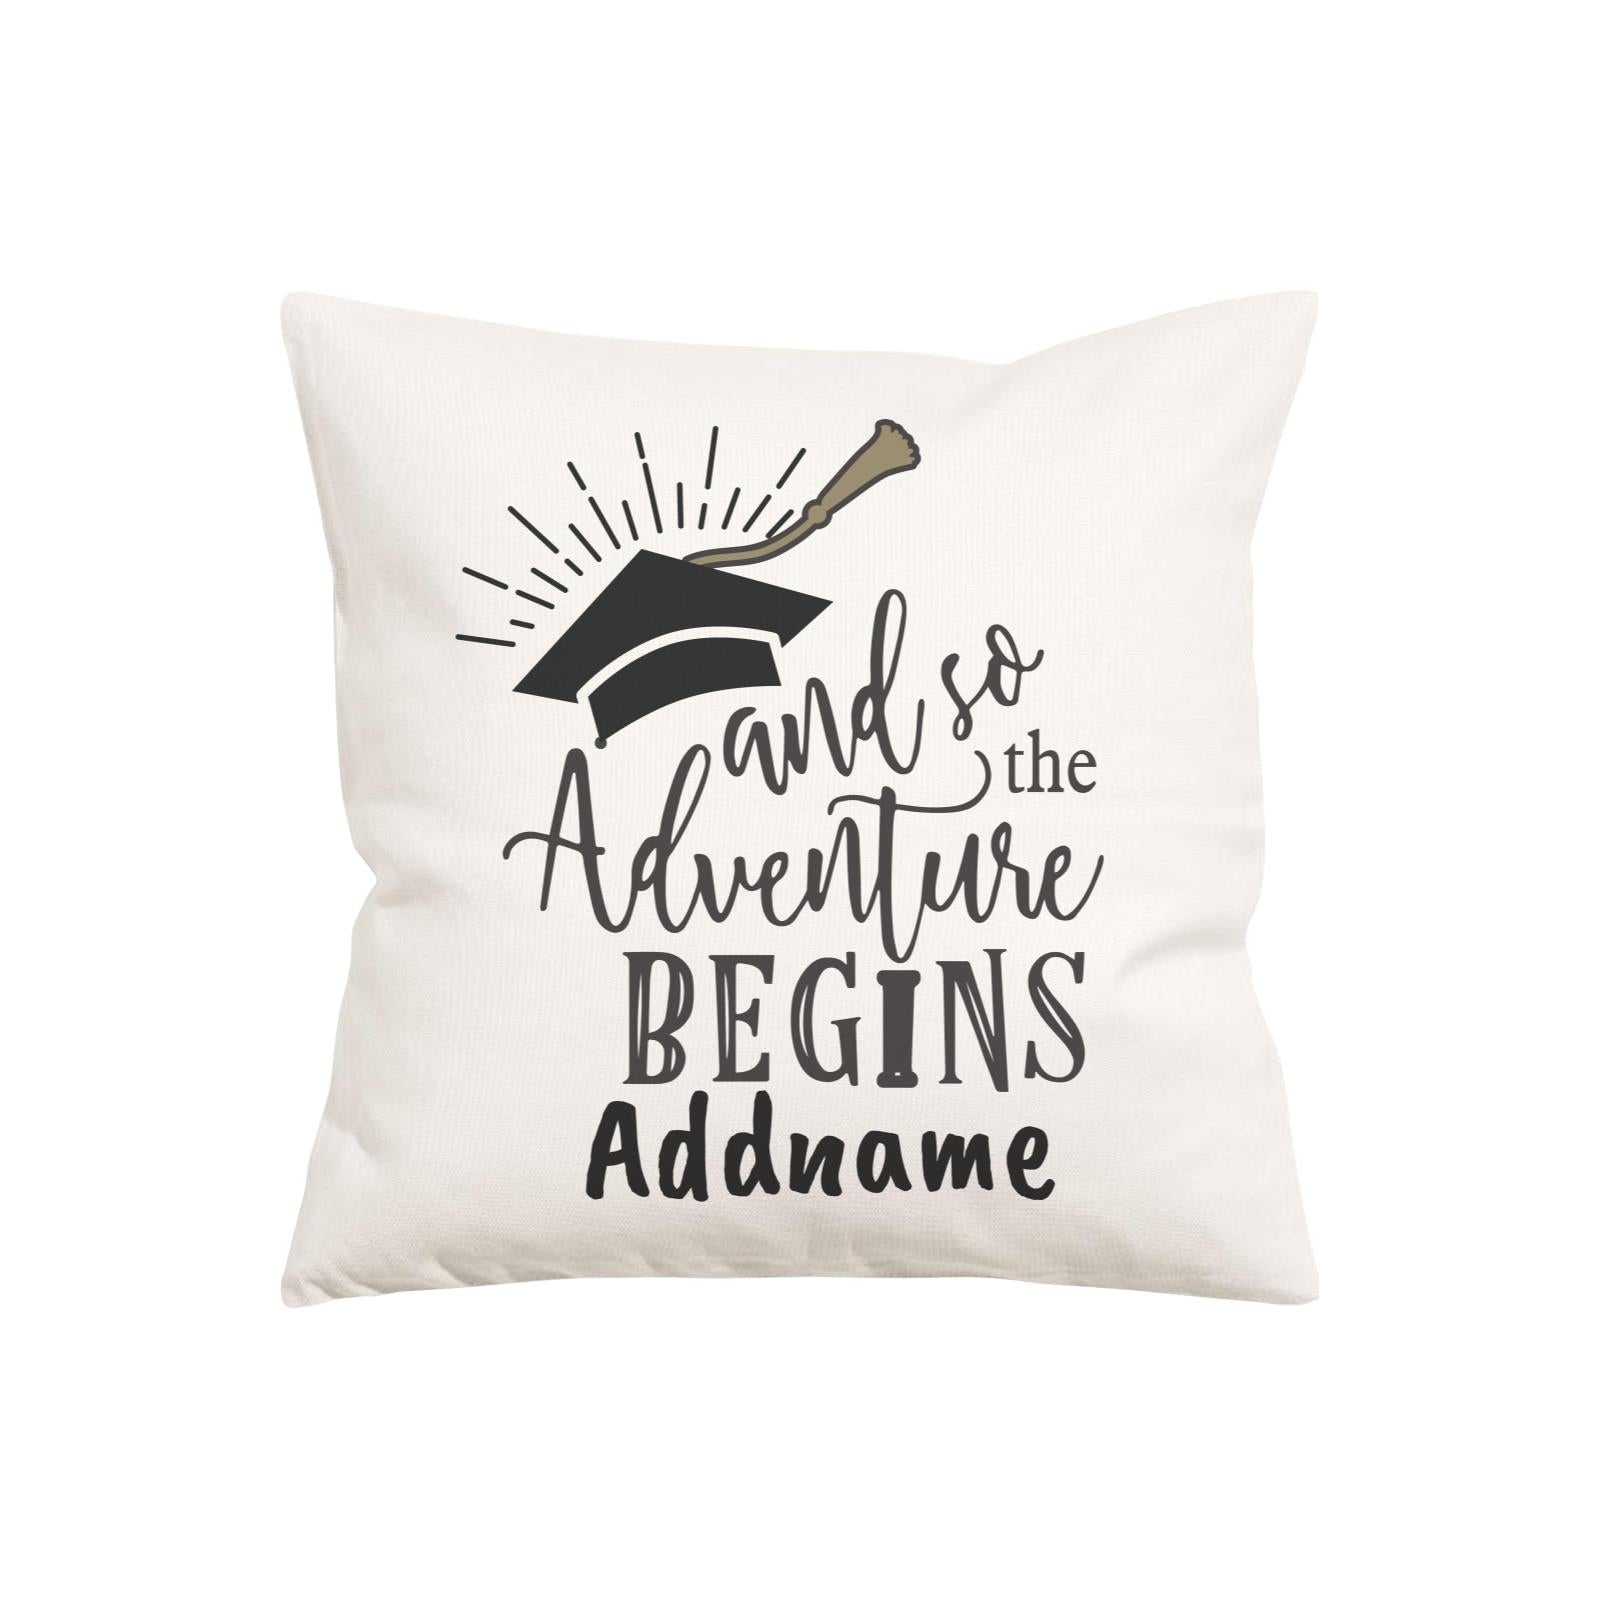 Graduation Series And So The Adventure Begins Pillow Cushion Cover with Inner Cushion